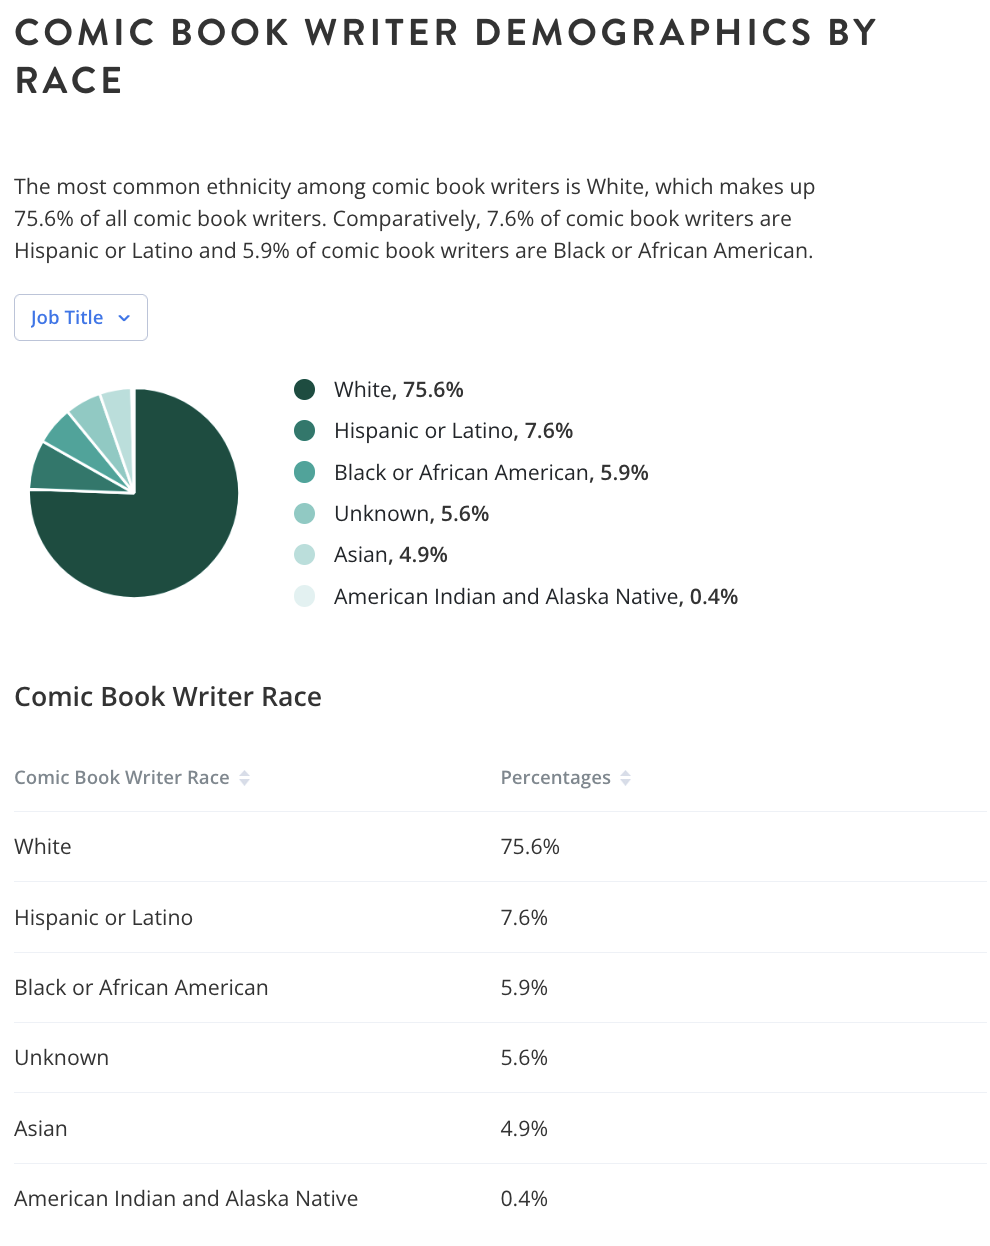 Comic Book Writer Demographics by Race